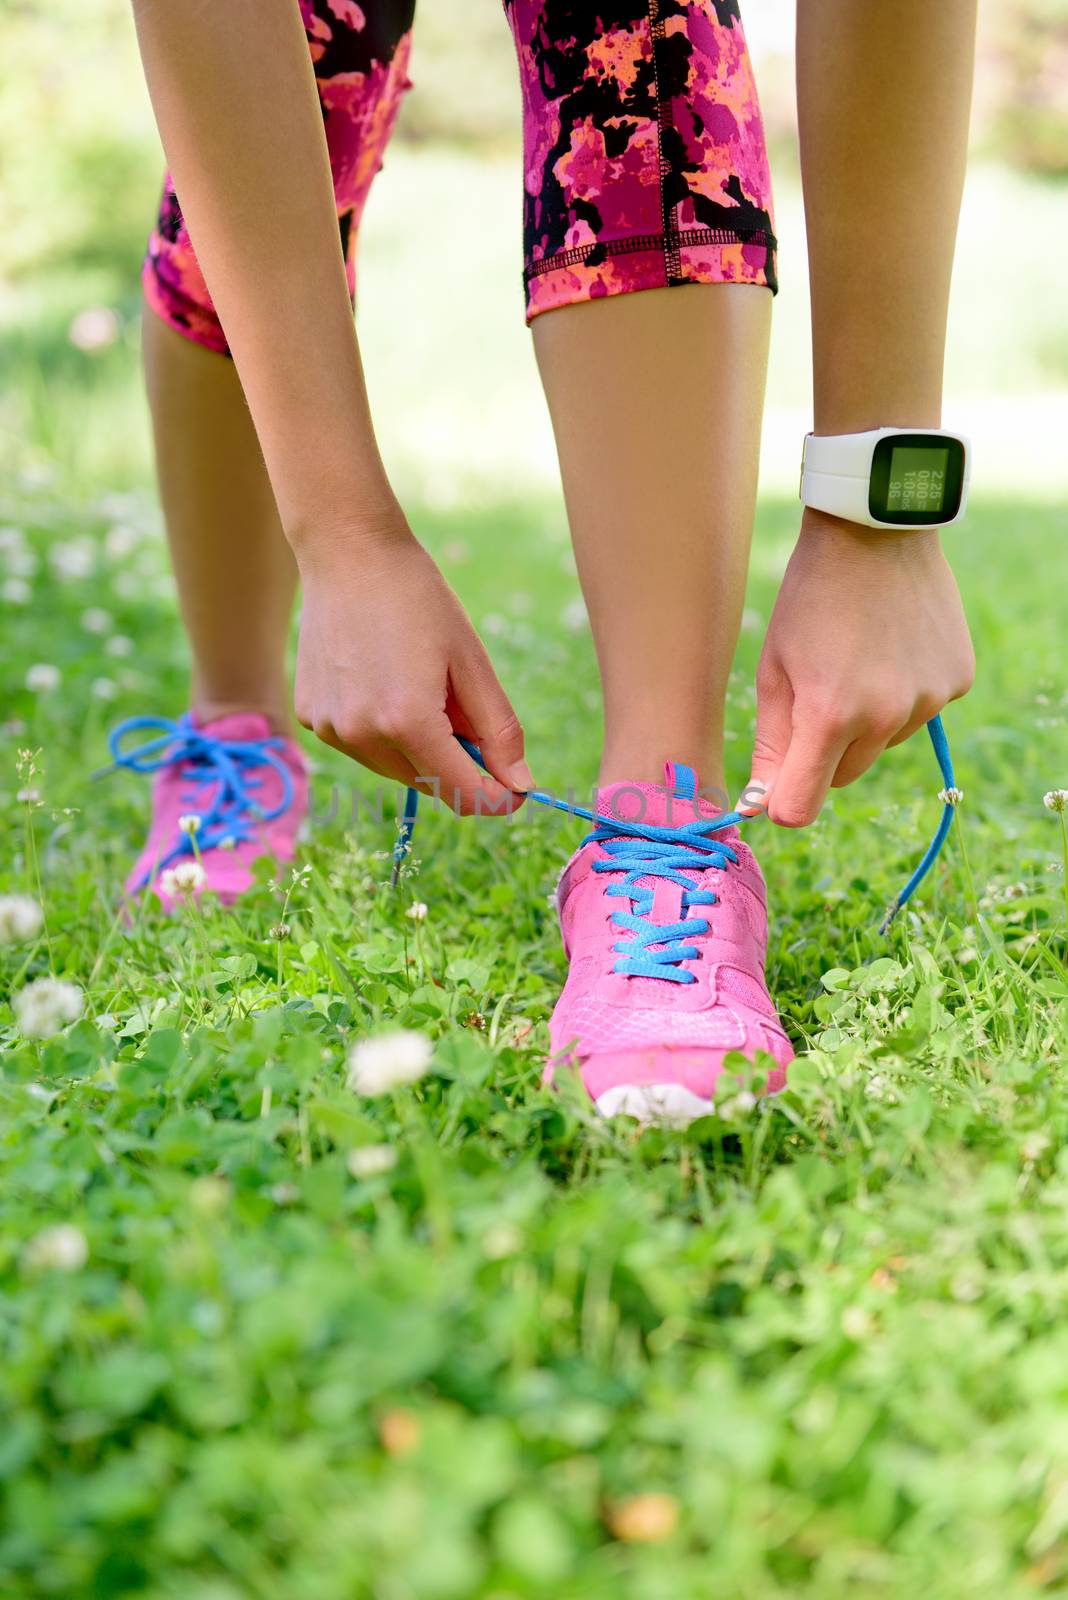 Weight loss - runner tying laces wearing smartwatch heat rate monitor and activity tracker for cardio exercise. Woman getting ready for jogging workout. Closeup of running shoes.